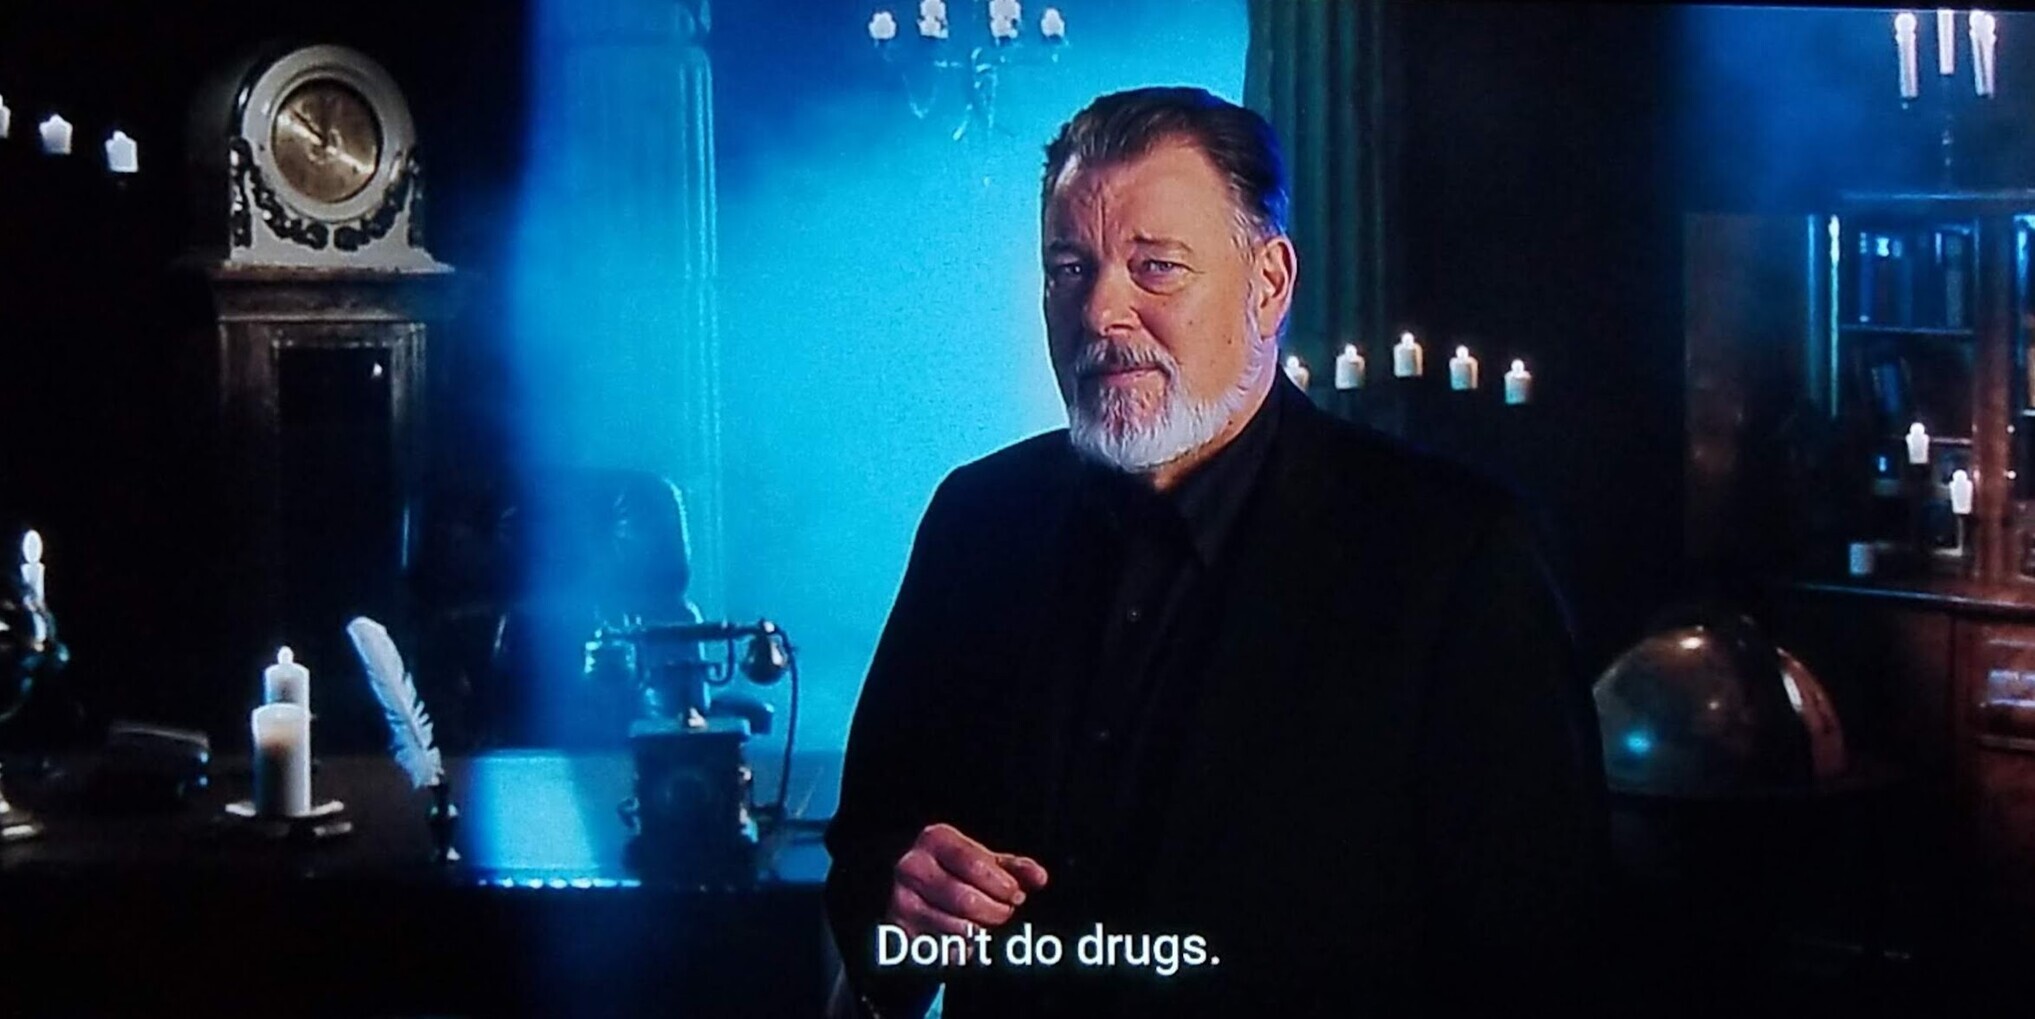 jonathan frakes with a salt and pepper beard saying don't do drugs